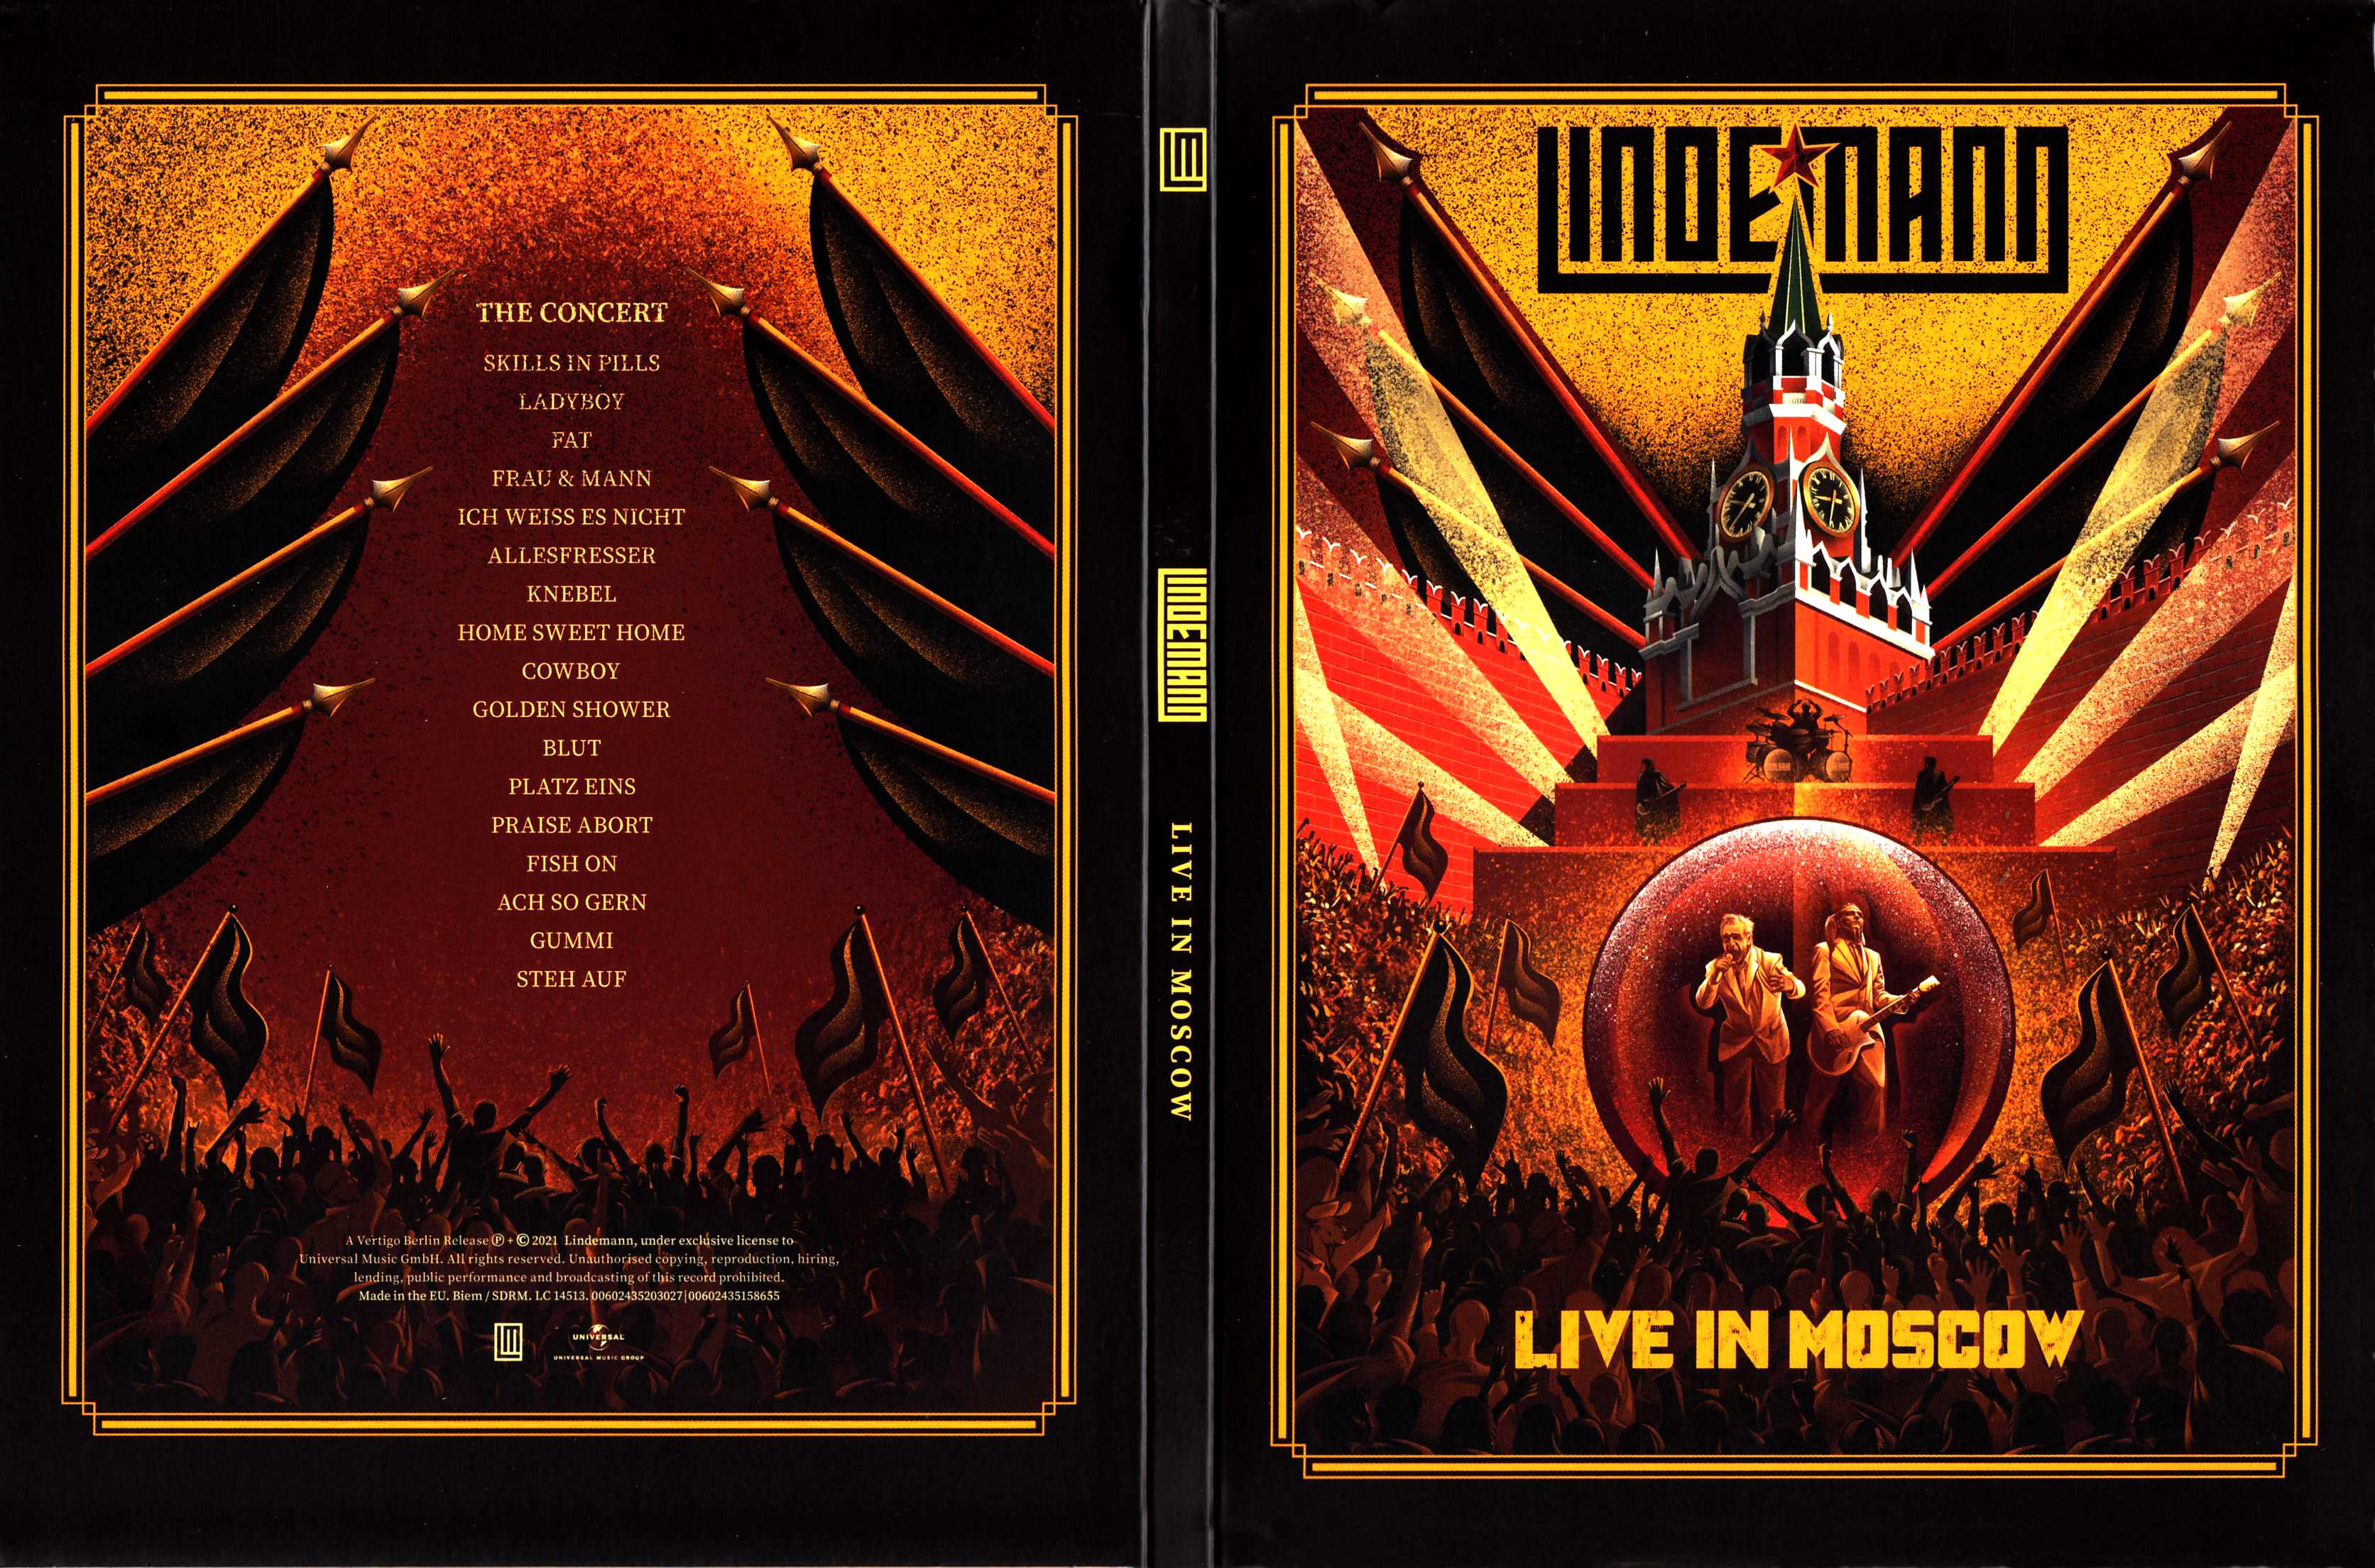 Jaquette DVD Lindemann - Live in Moscow (2021)